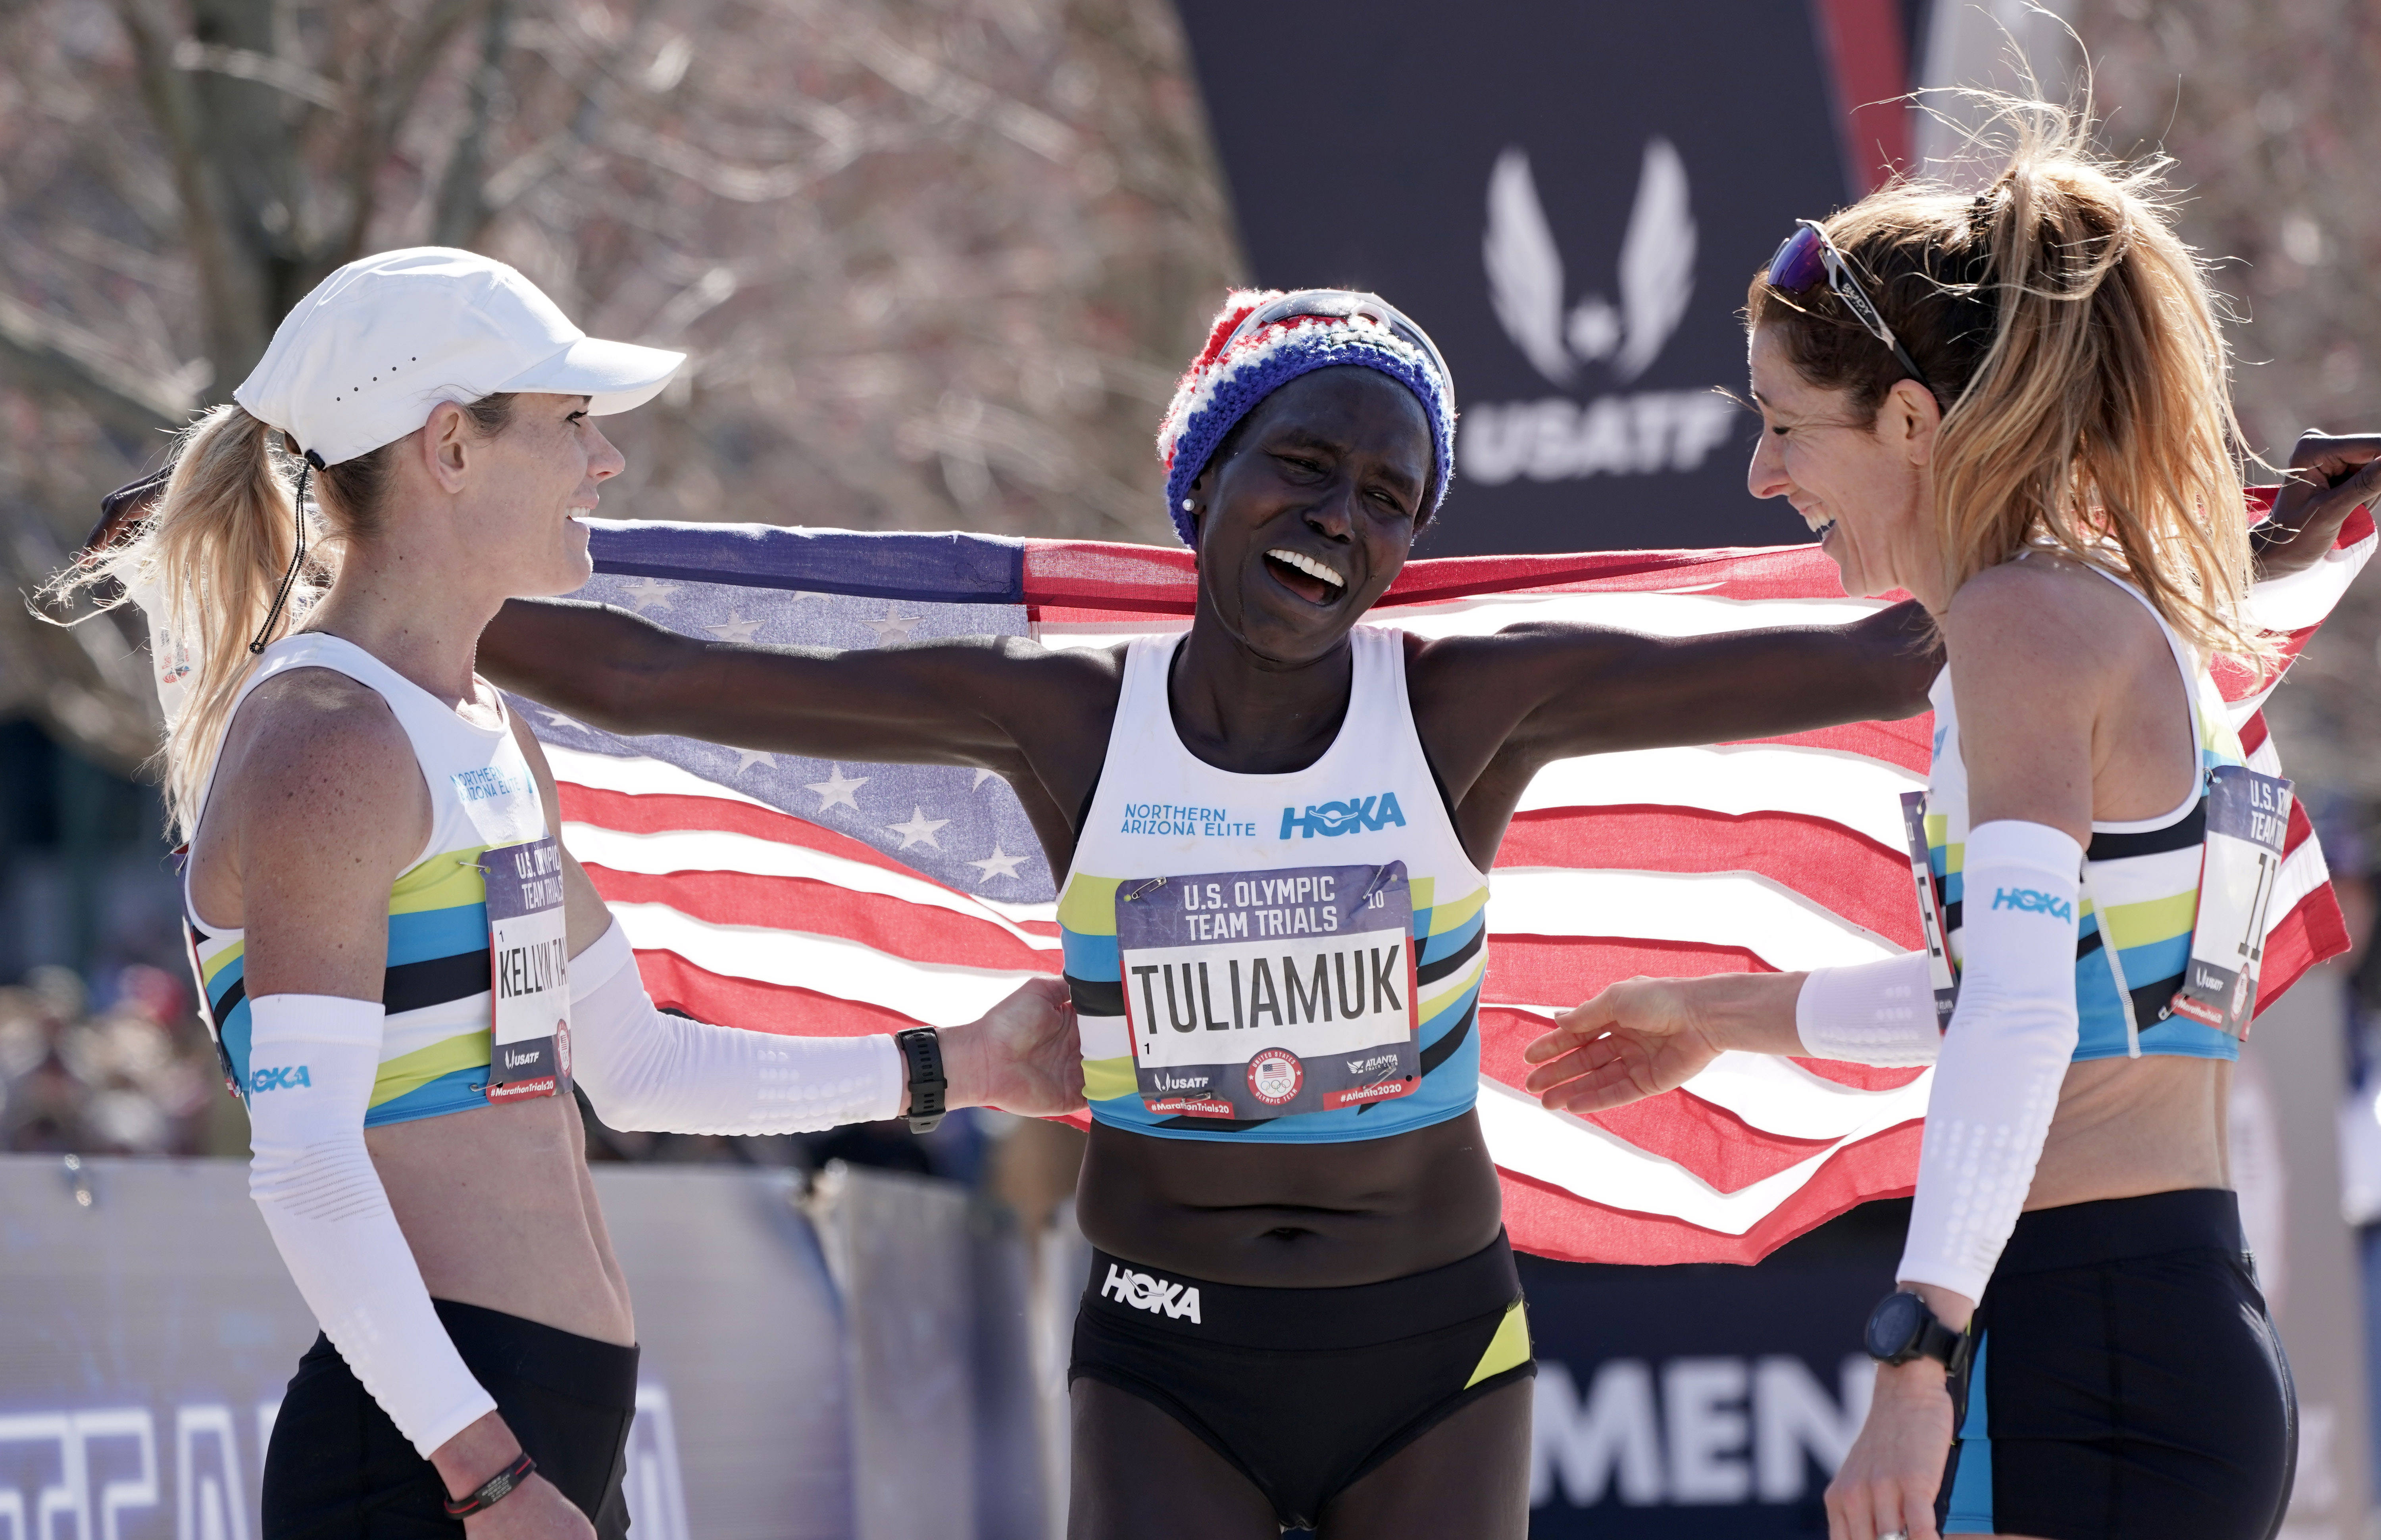 Tuliamuk (center) celebrated with Kellyn Taylor (left) and Bruce after winning the U.S. Olympic Team Trials marathon in 2020.